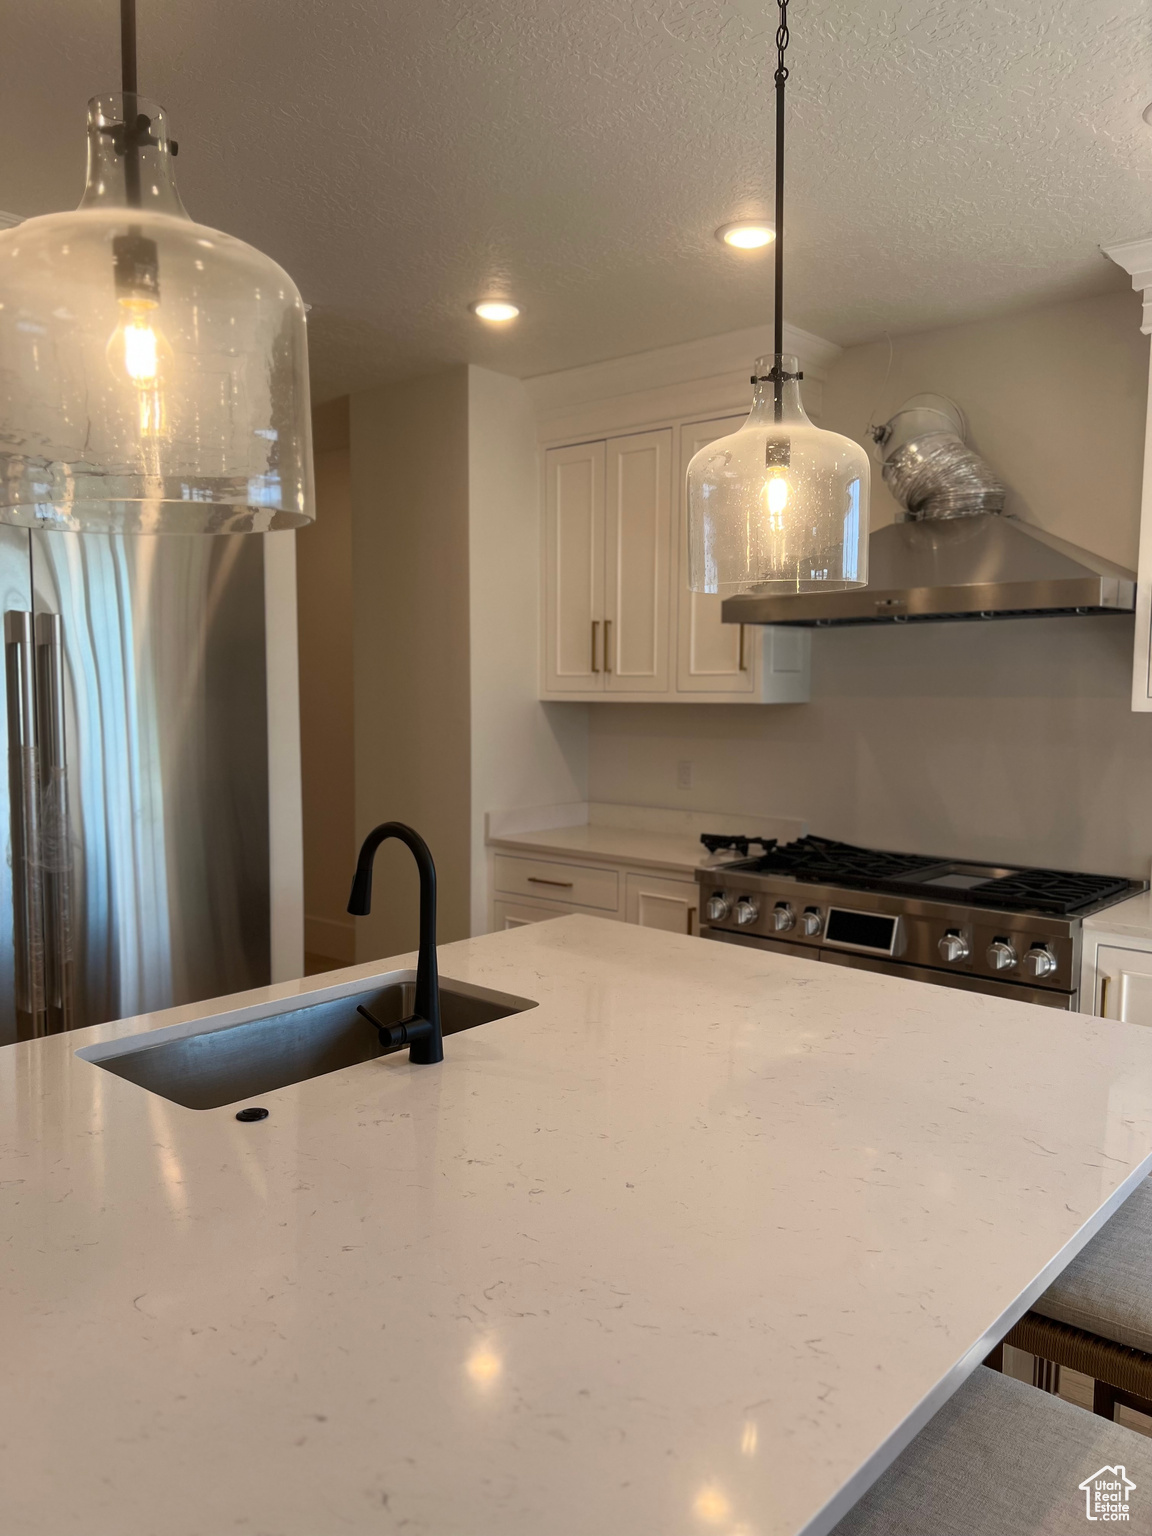 Kitchen featuring white cabinets, hanging light fixtures, and light stone counters